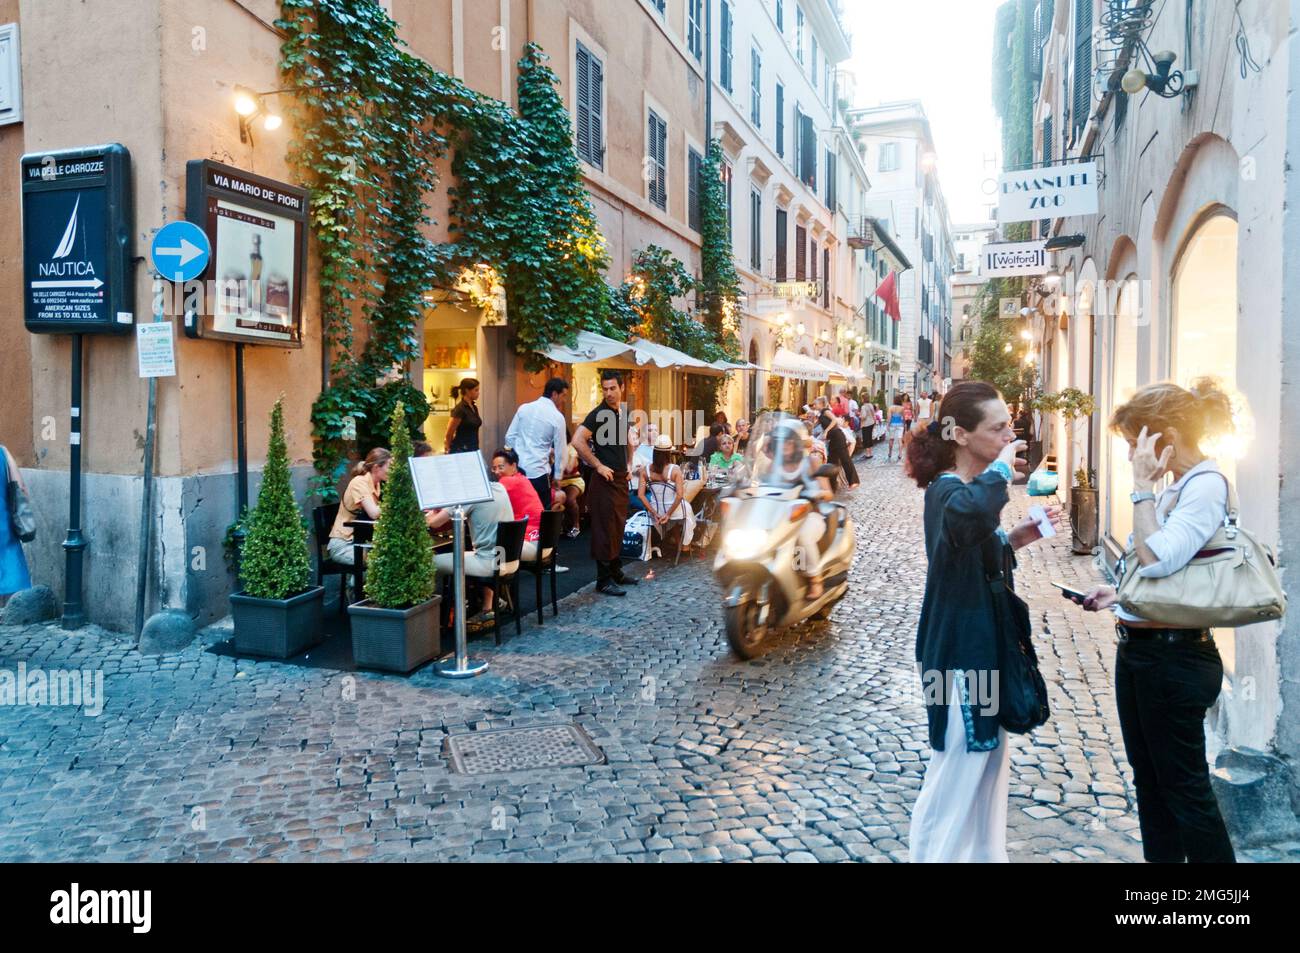 A Rome street scene with diners at outdoor tables and two women chatting to each other Stock Photo